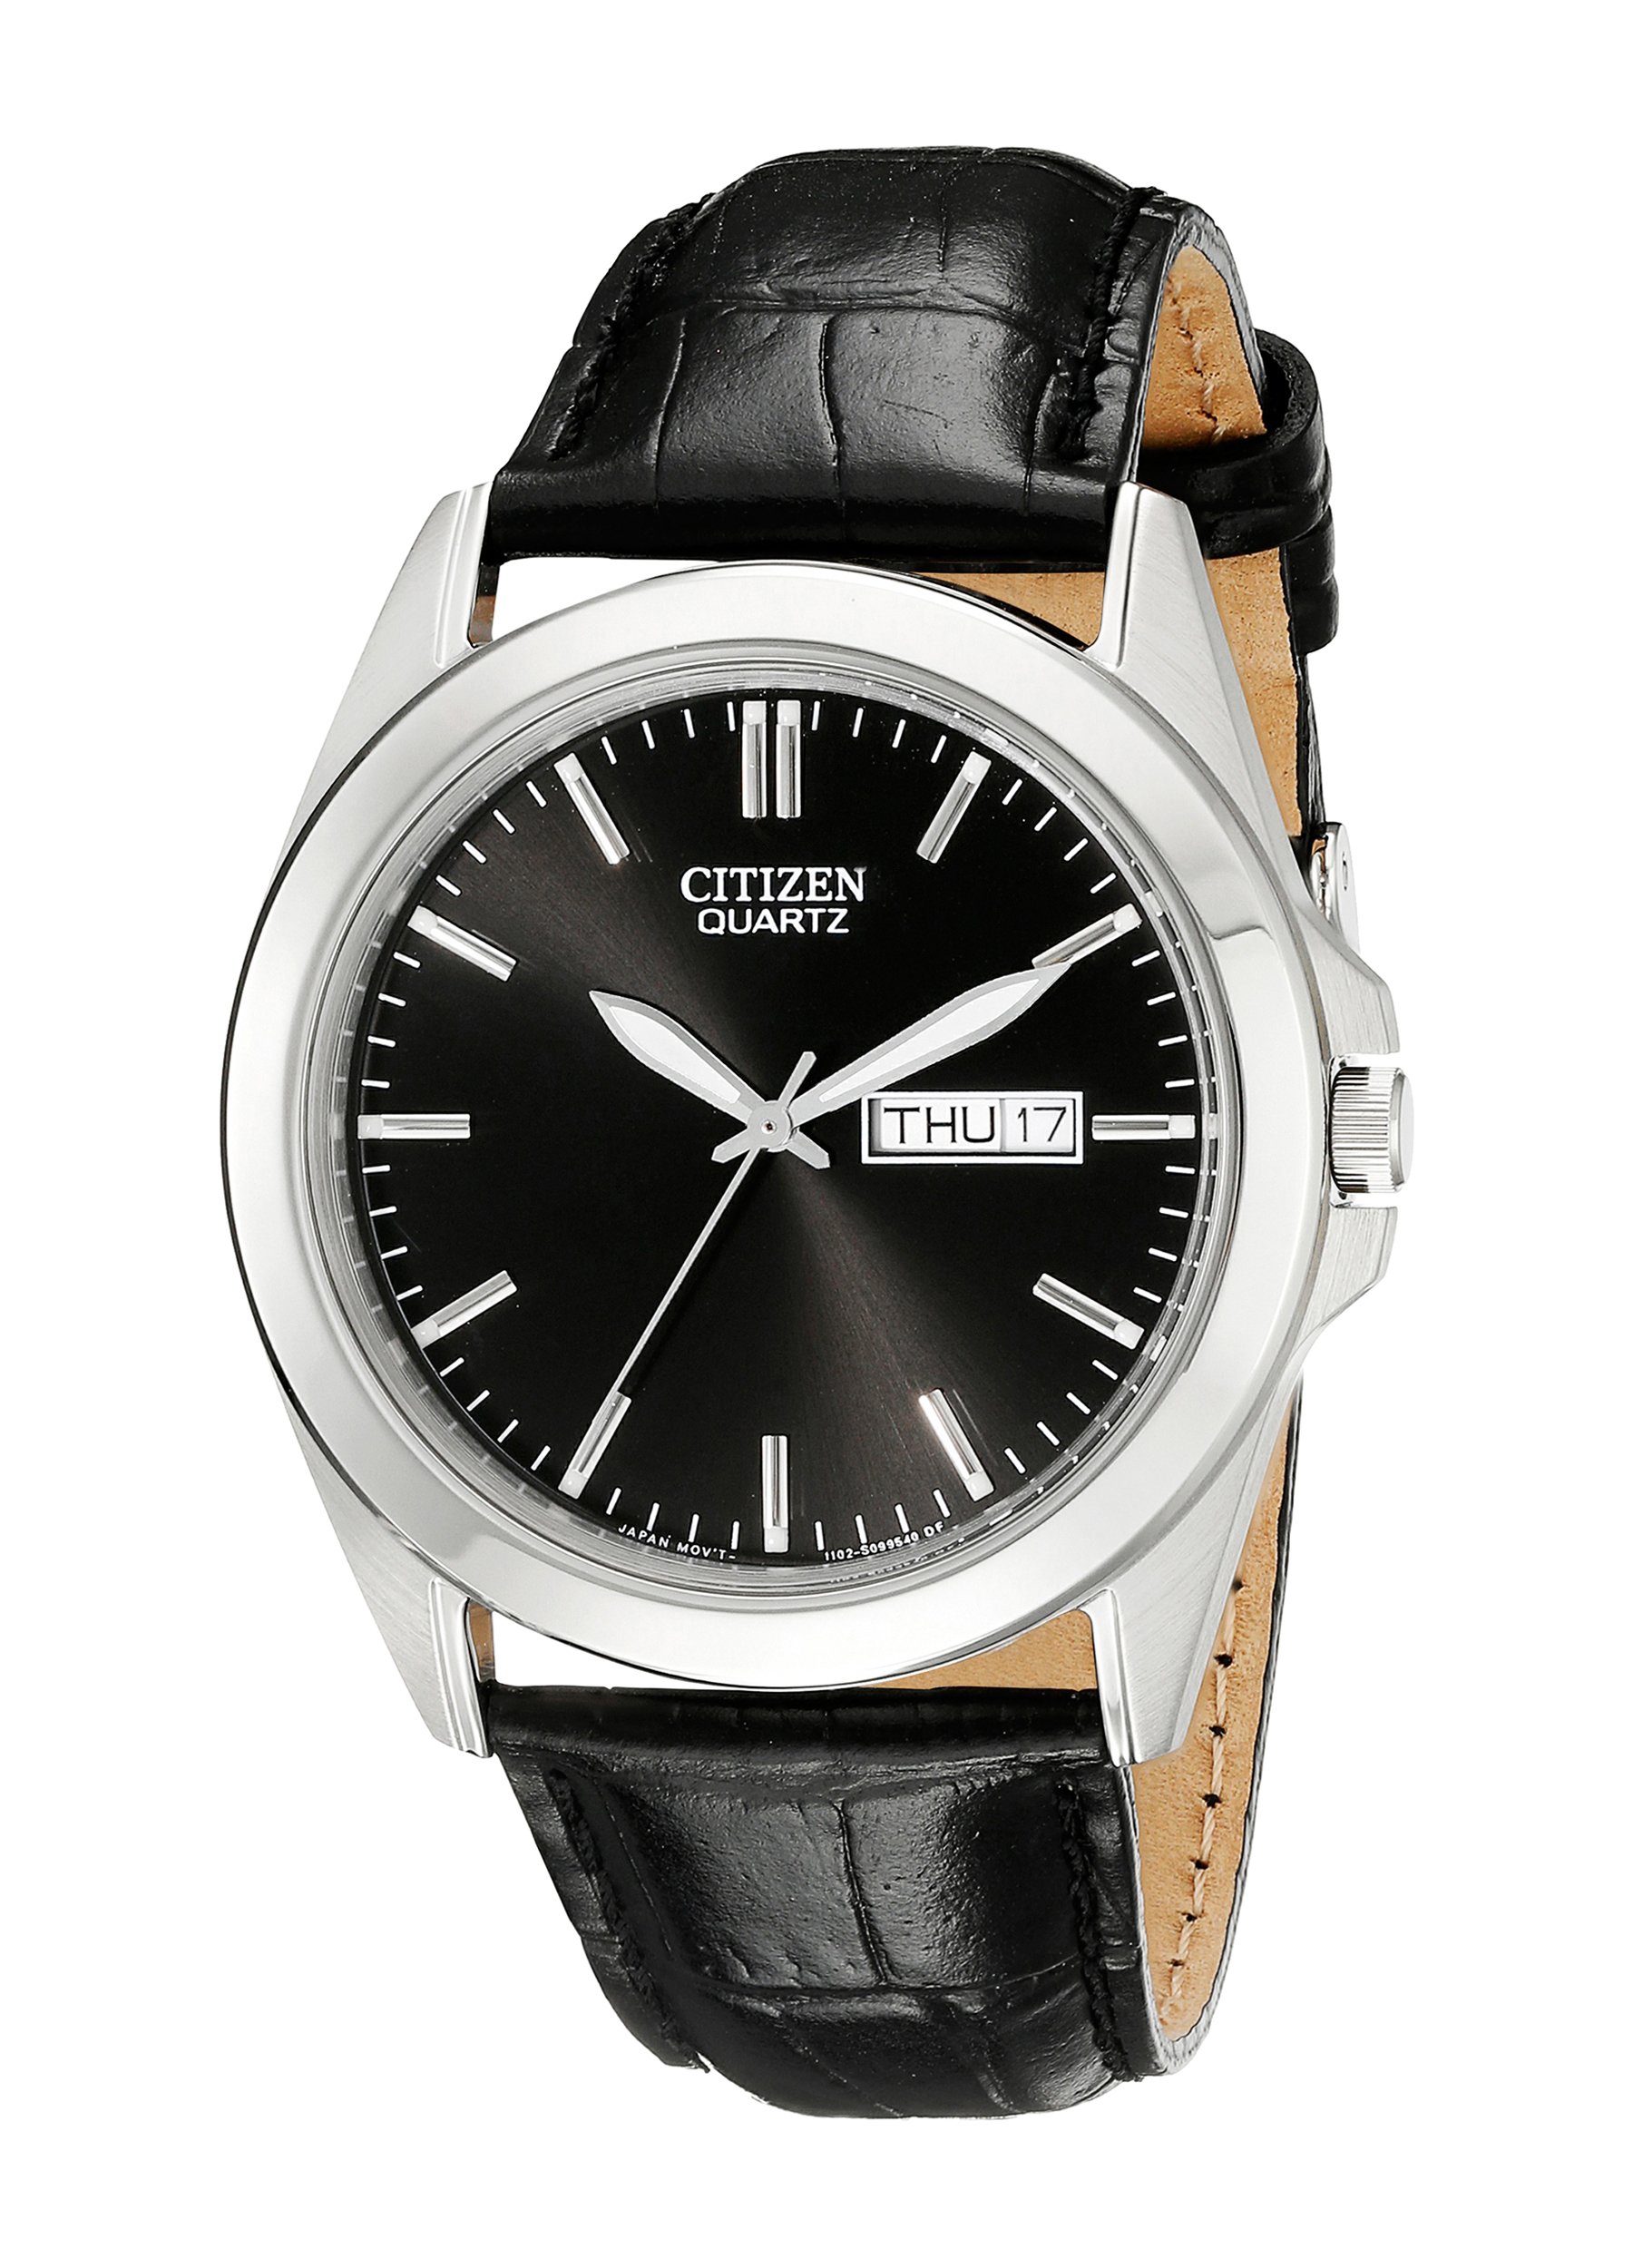 Citizen Quartz Mens Watch, Stainless Steel with Leather strap, Casual, Black (Model: BF0580-06E)